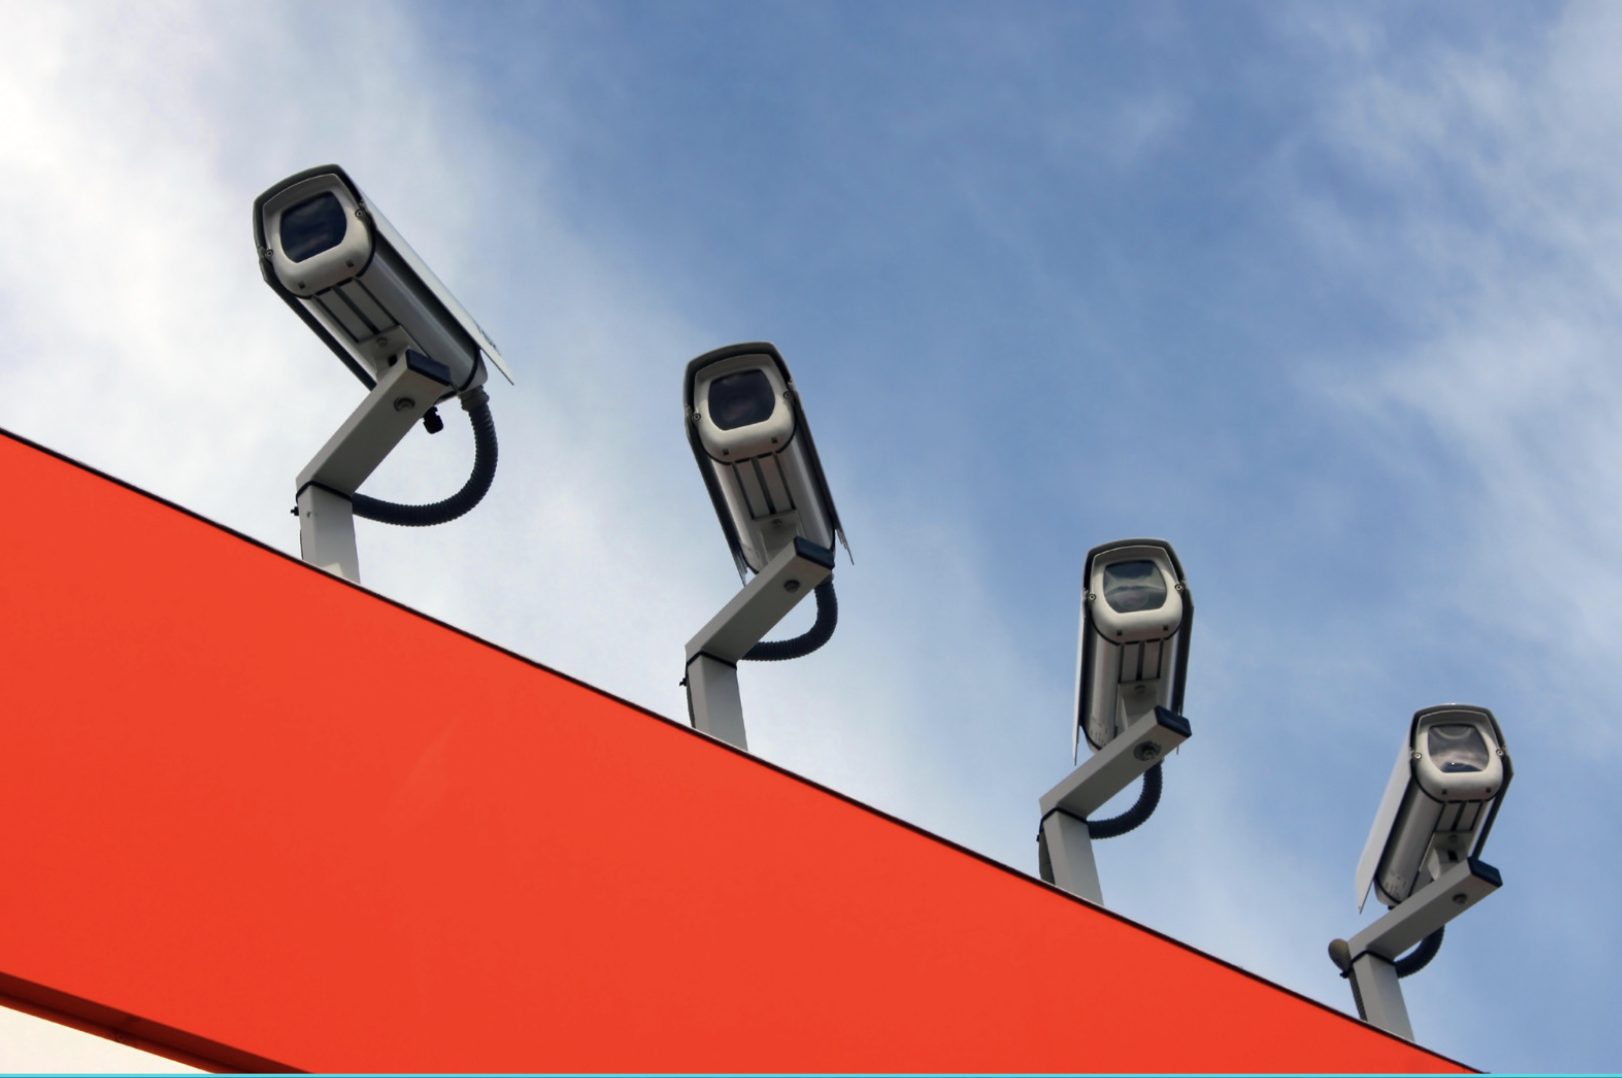 Four security cameras overlook on top of a building